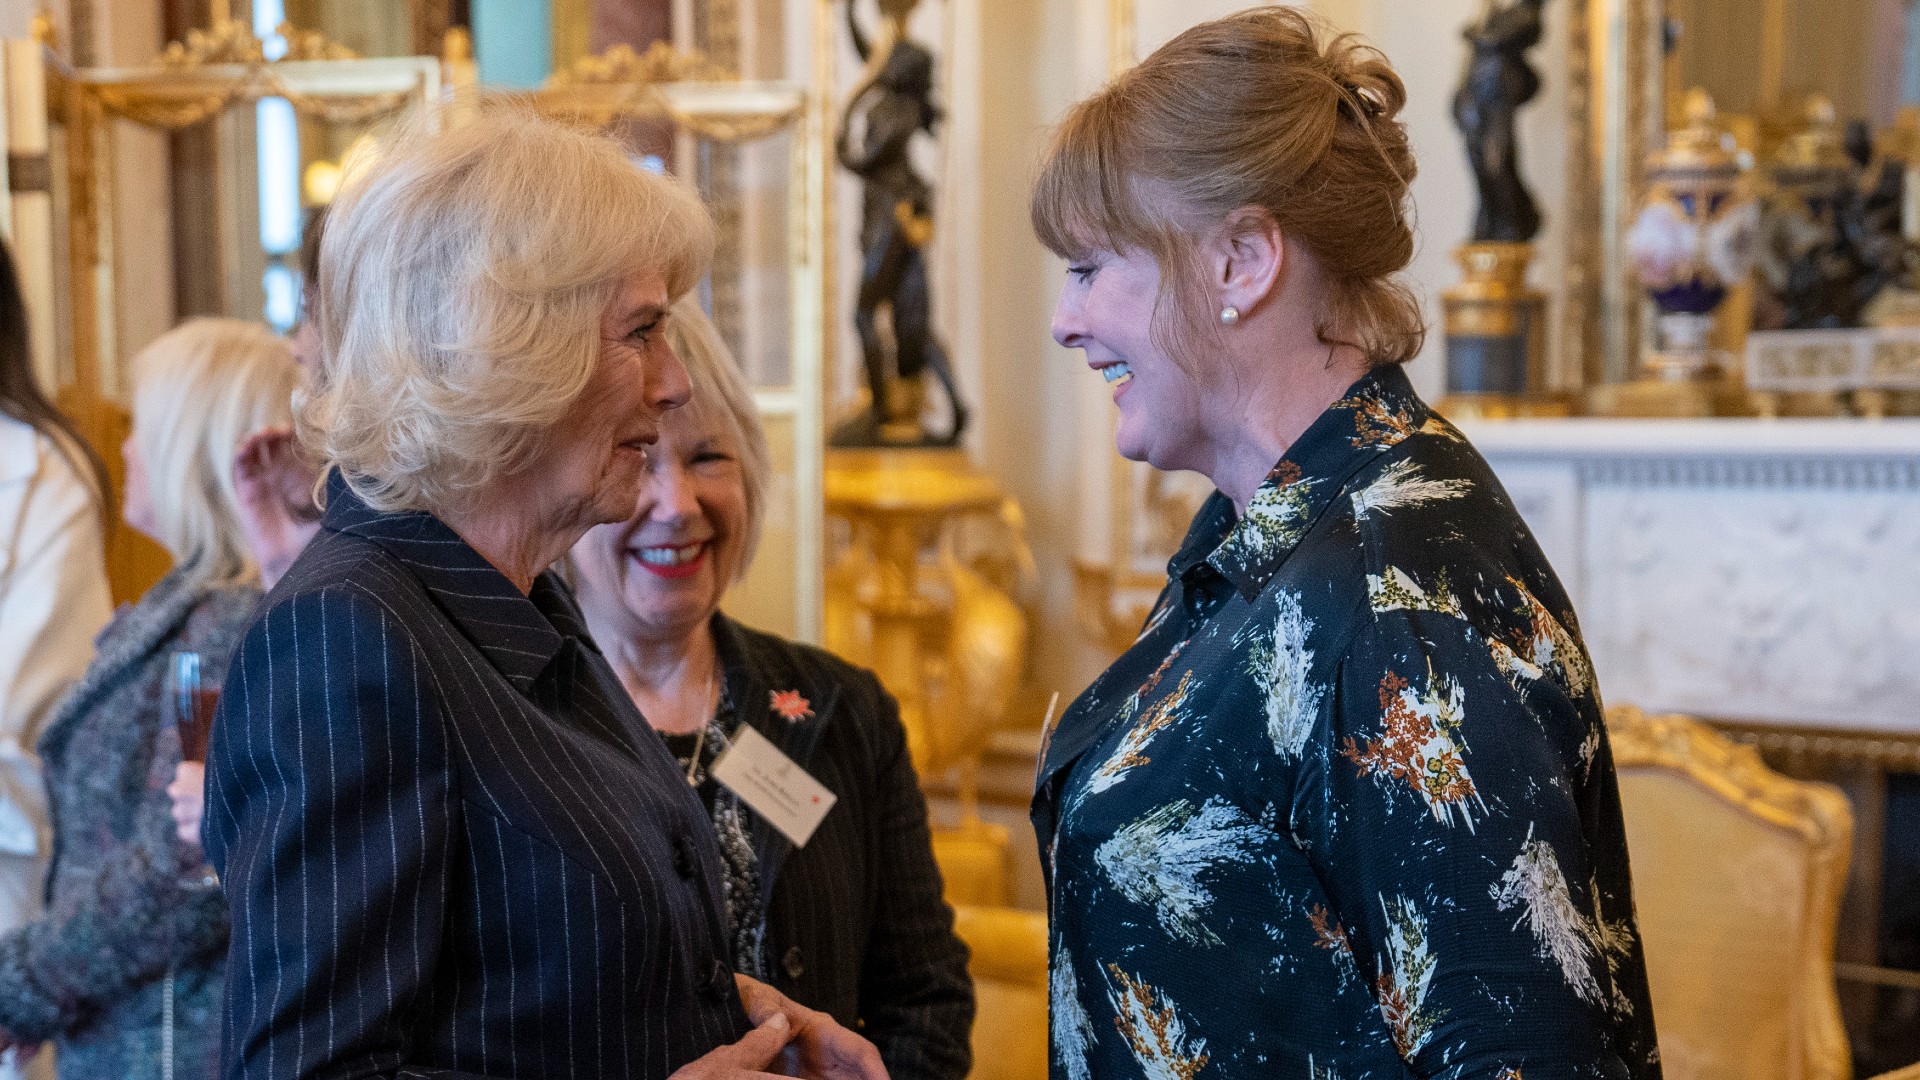 WATCH: Sarah Lancashire Discusses 'Happy Valley' with Camilla, Queen Consort